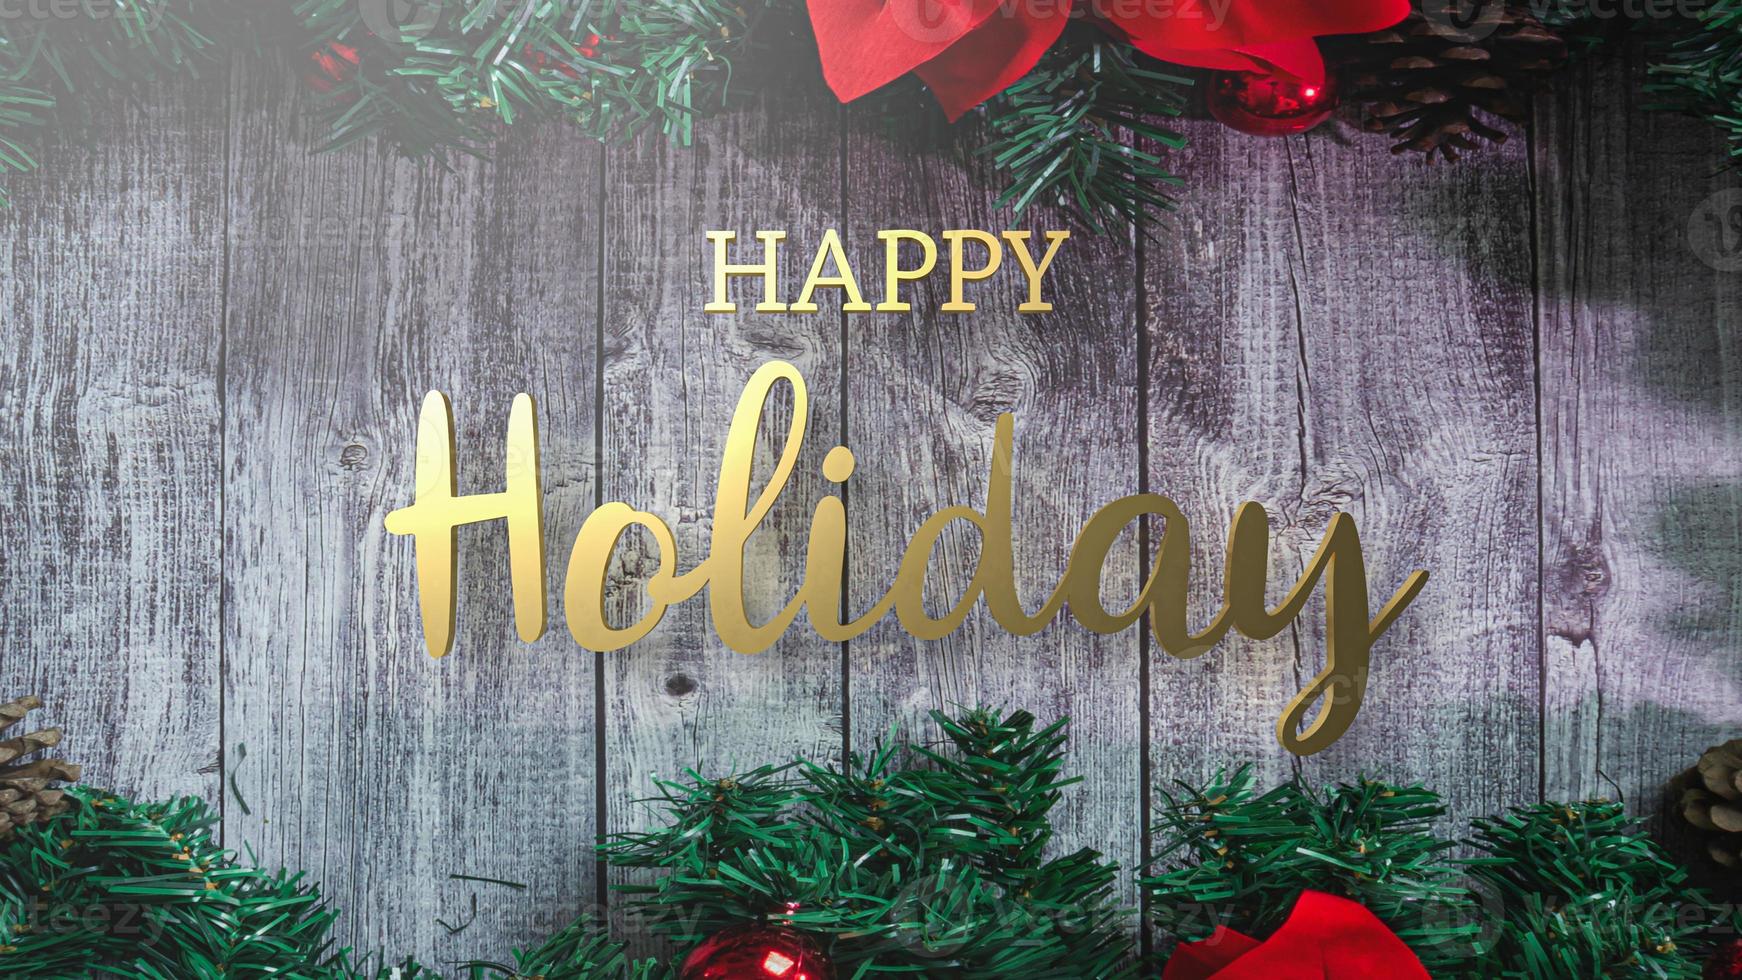 The gold happy holiday text on wood for Christmas or holiday concept 3d rendering photo